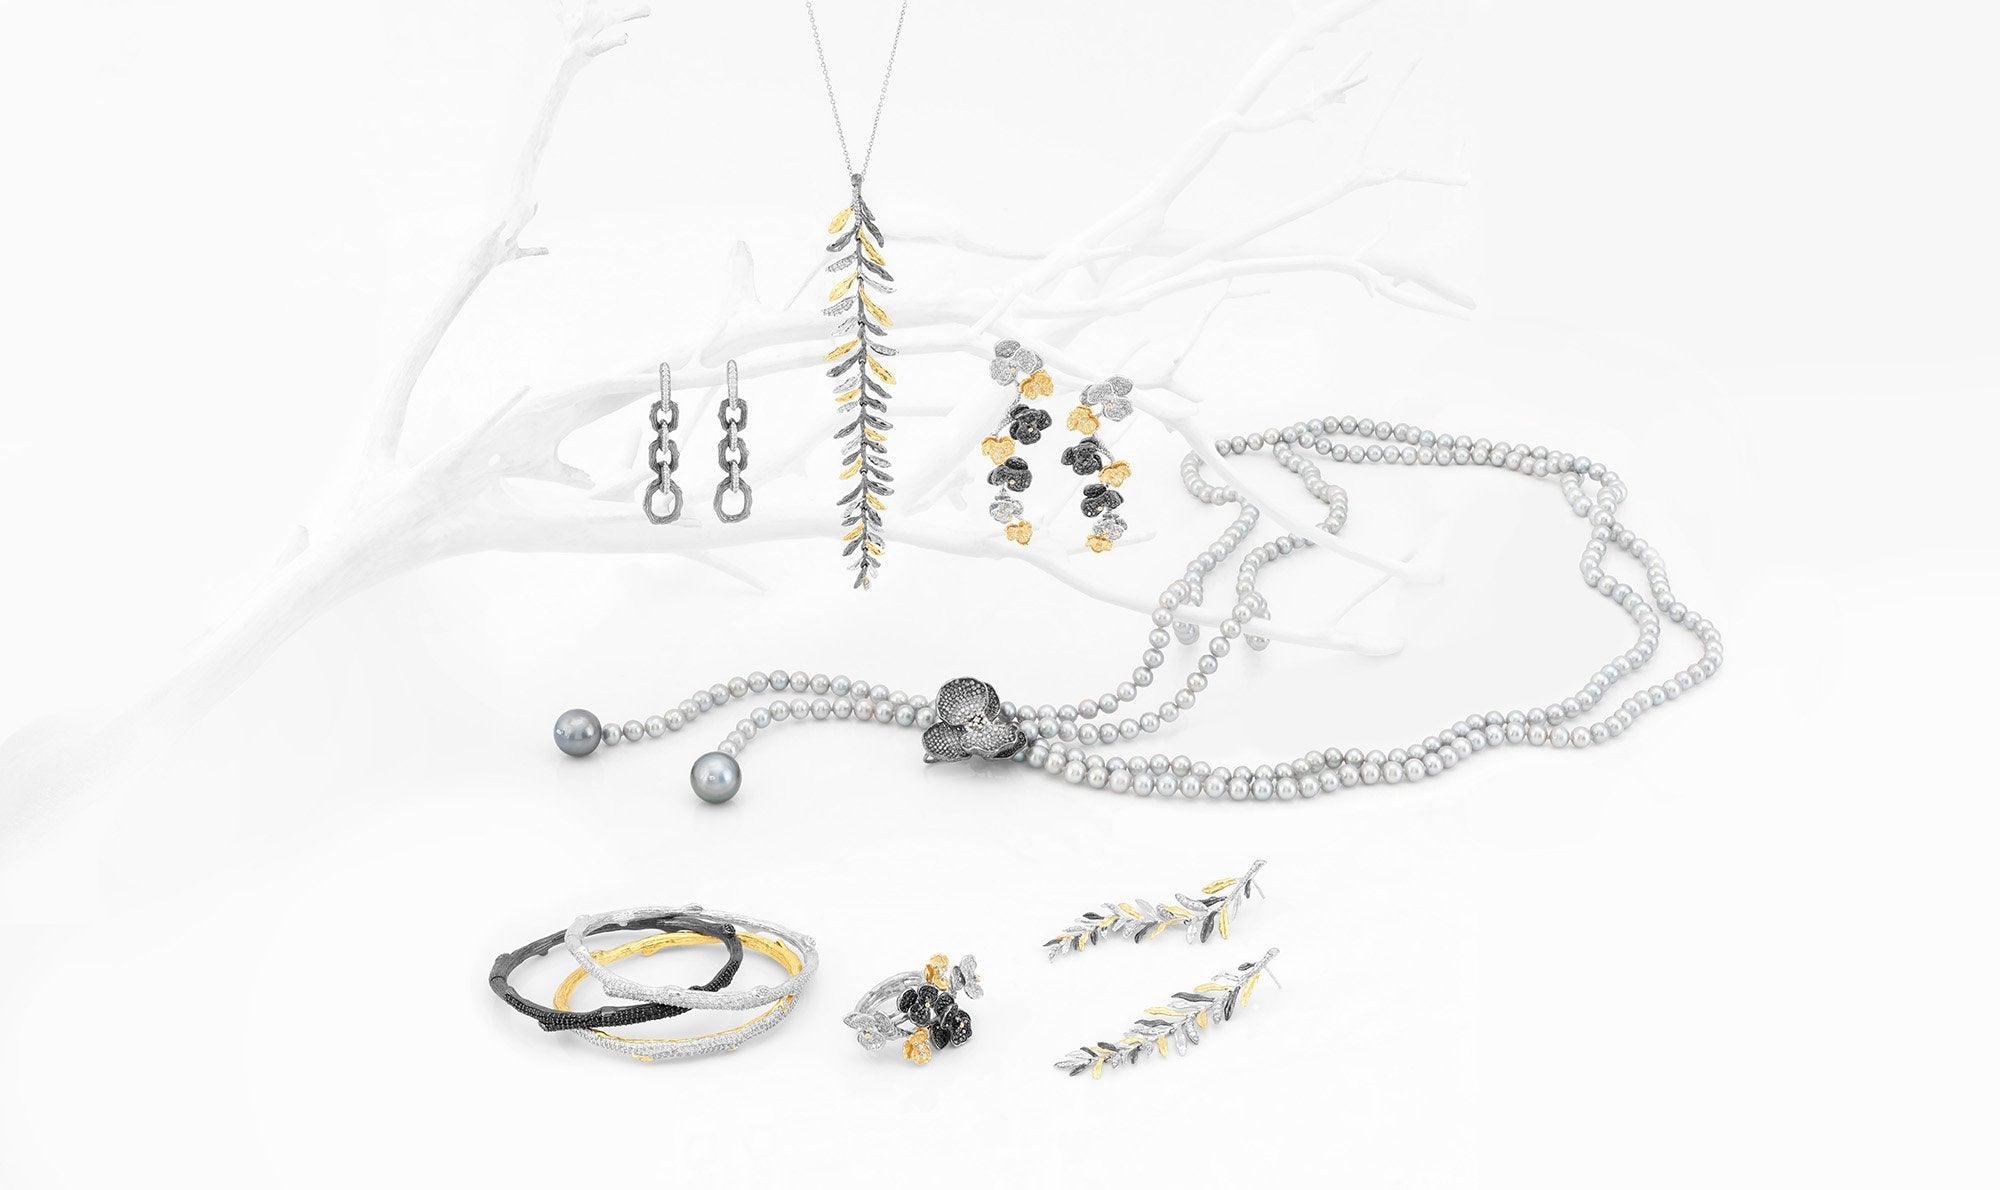 Michael Aram Introduced New Jewelry Collections - Michael Aram